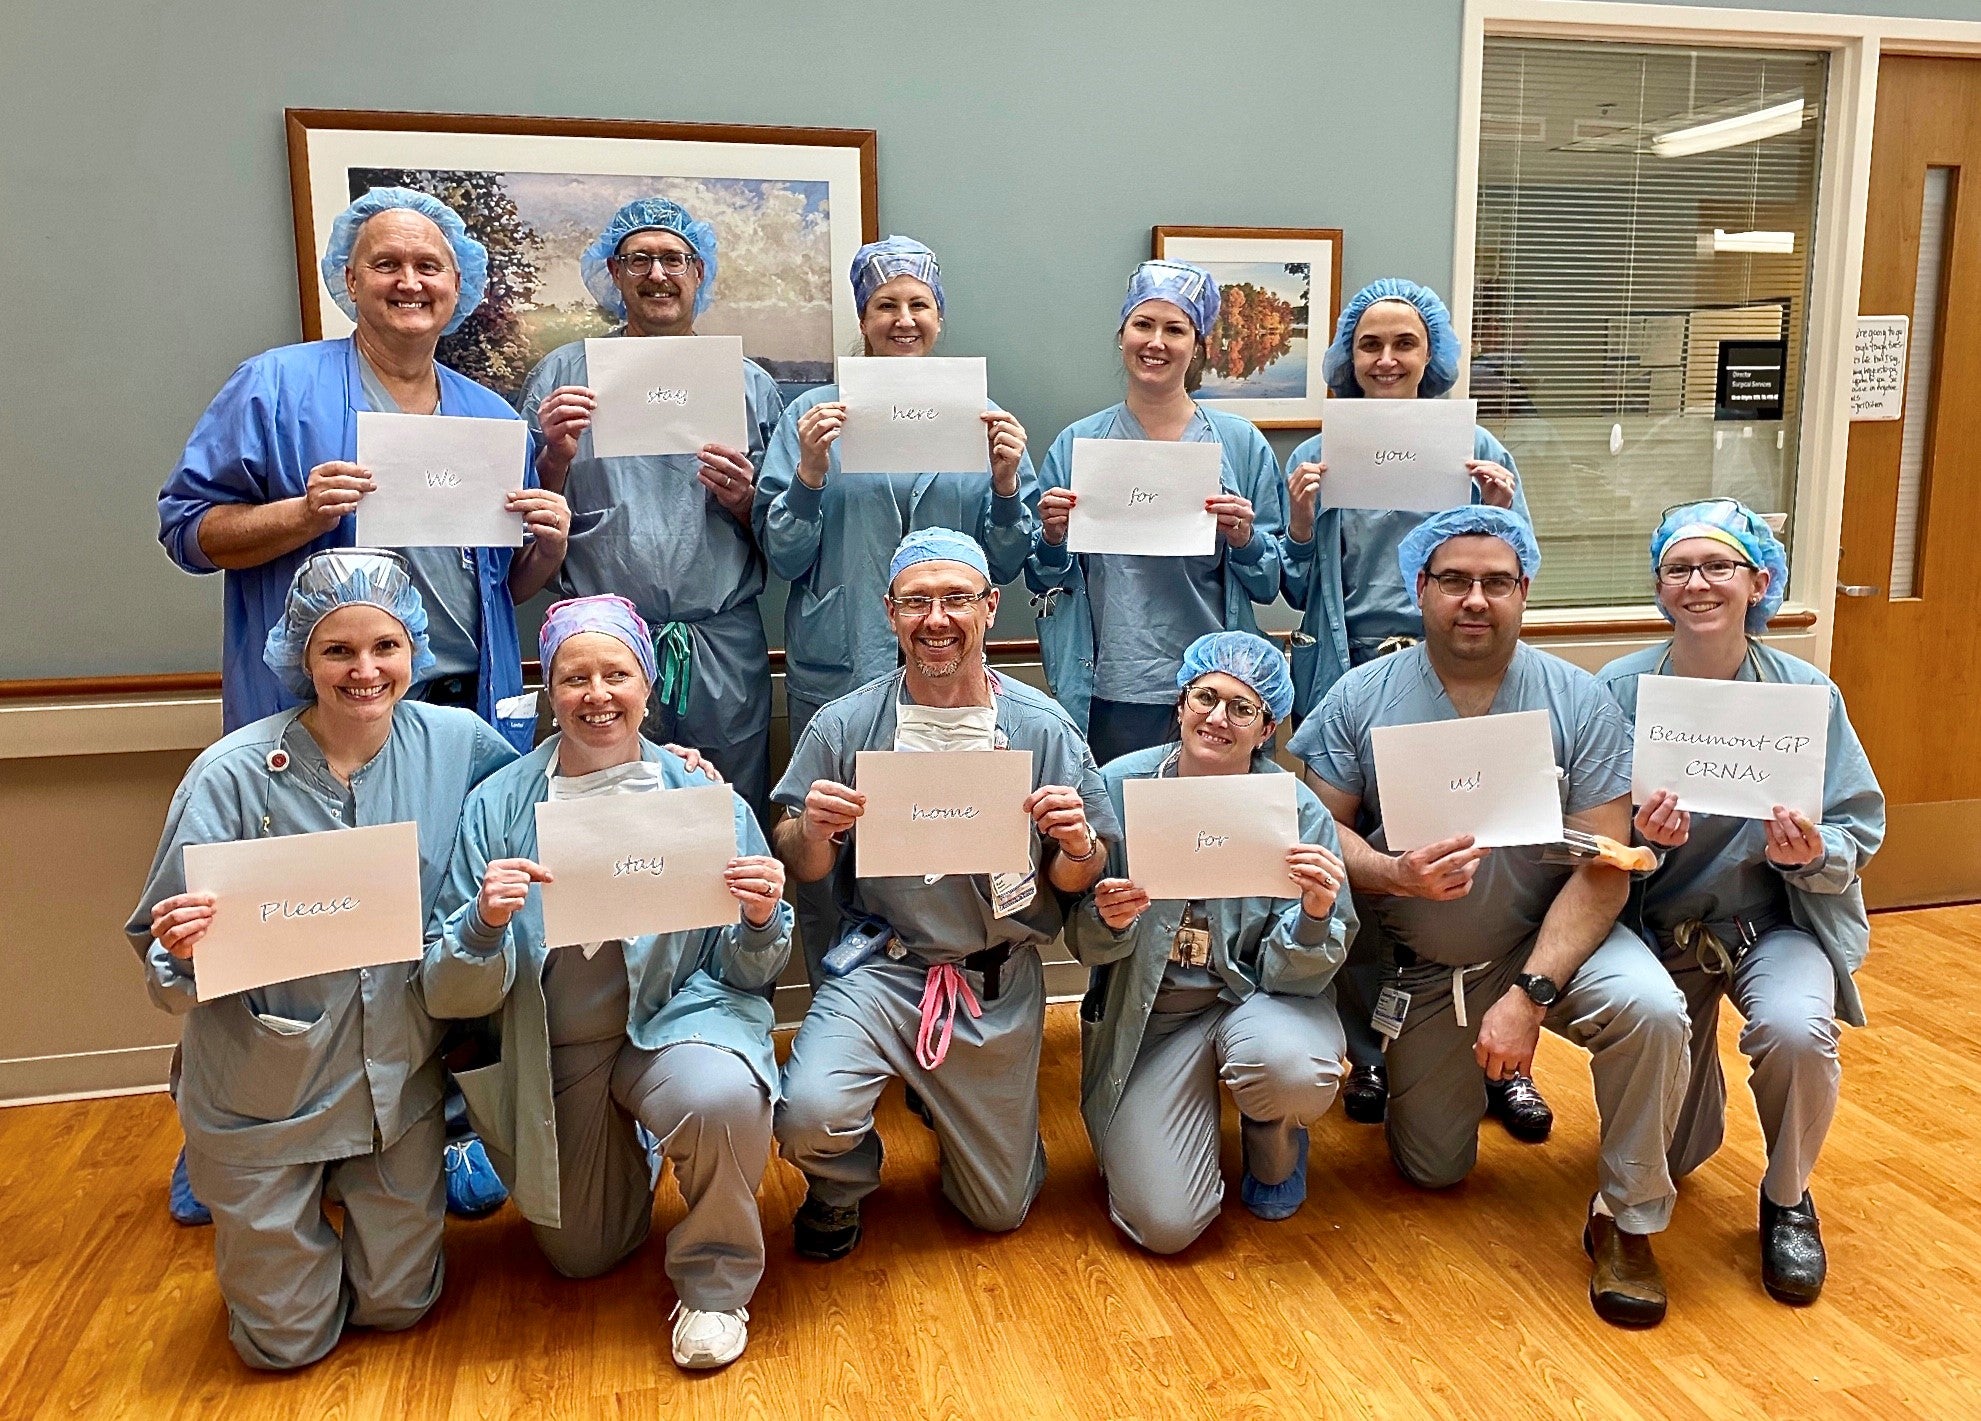 Mike stands in a group picture with the health team, each dressed in scrubs holding up paper that says 